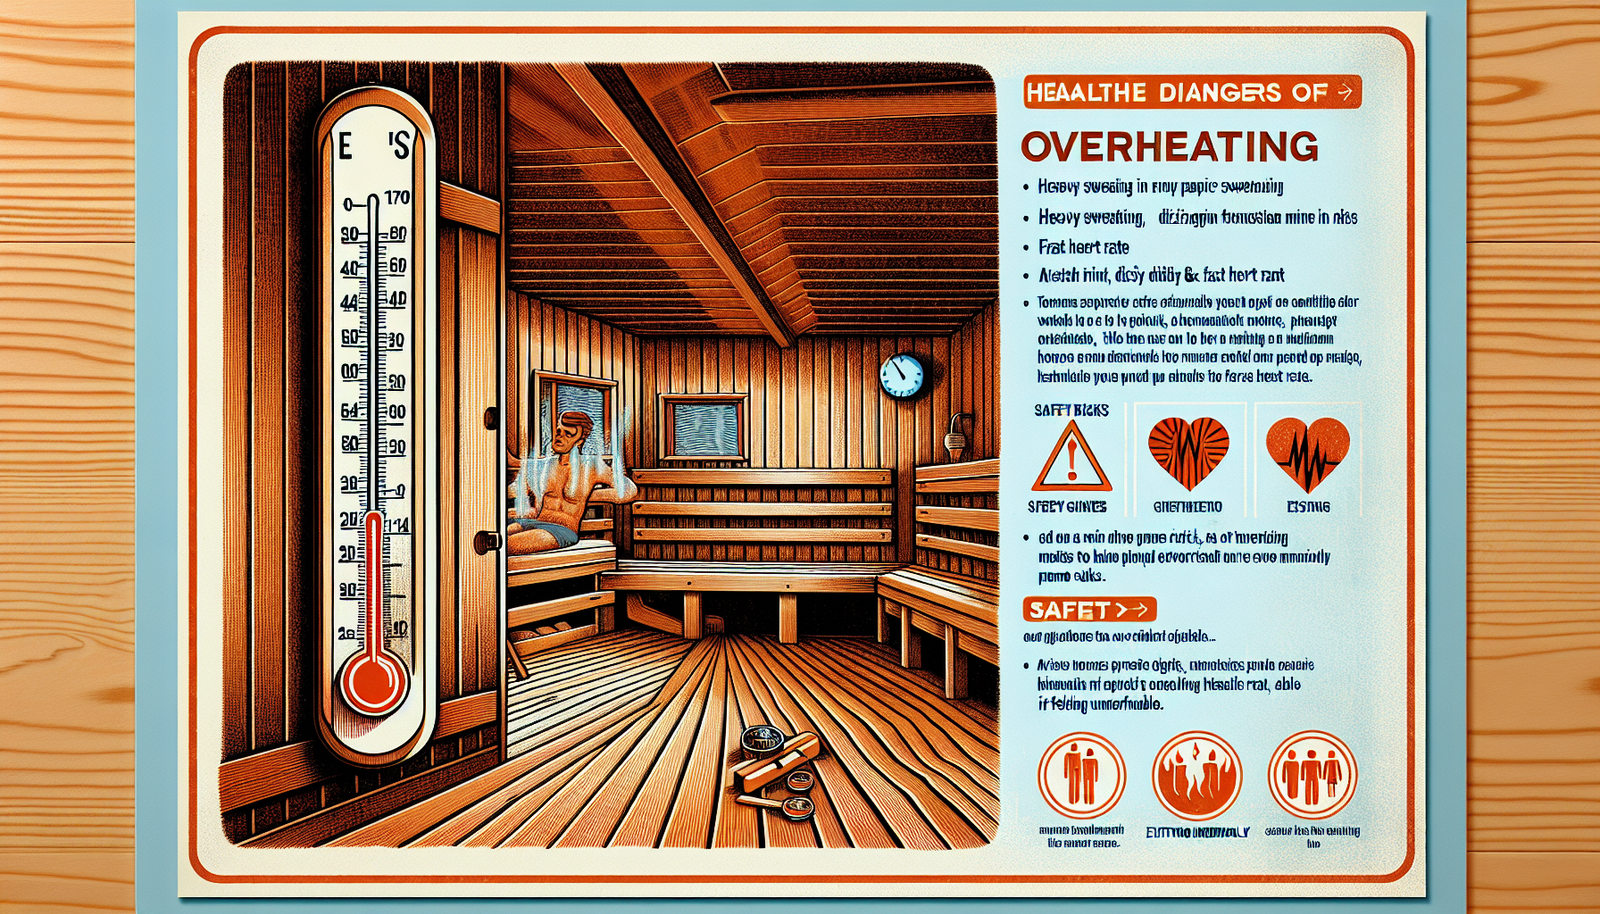 How Do You Know If A Sauna Is Too Hot For You?